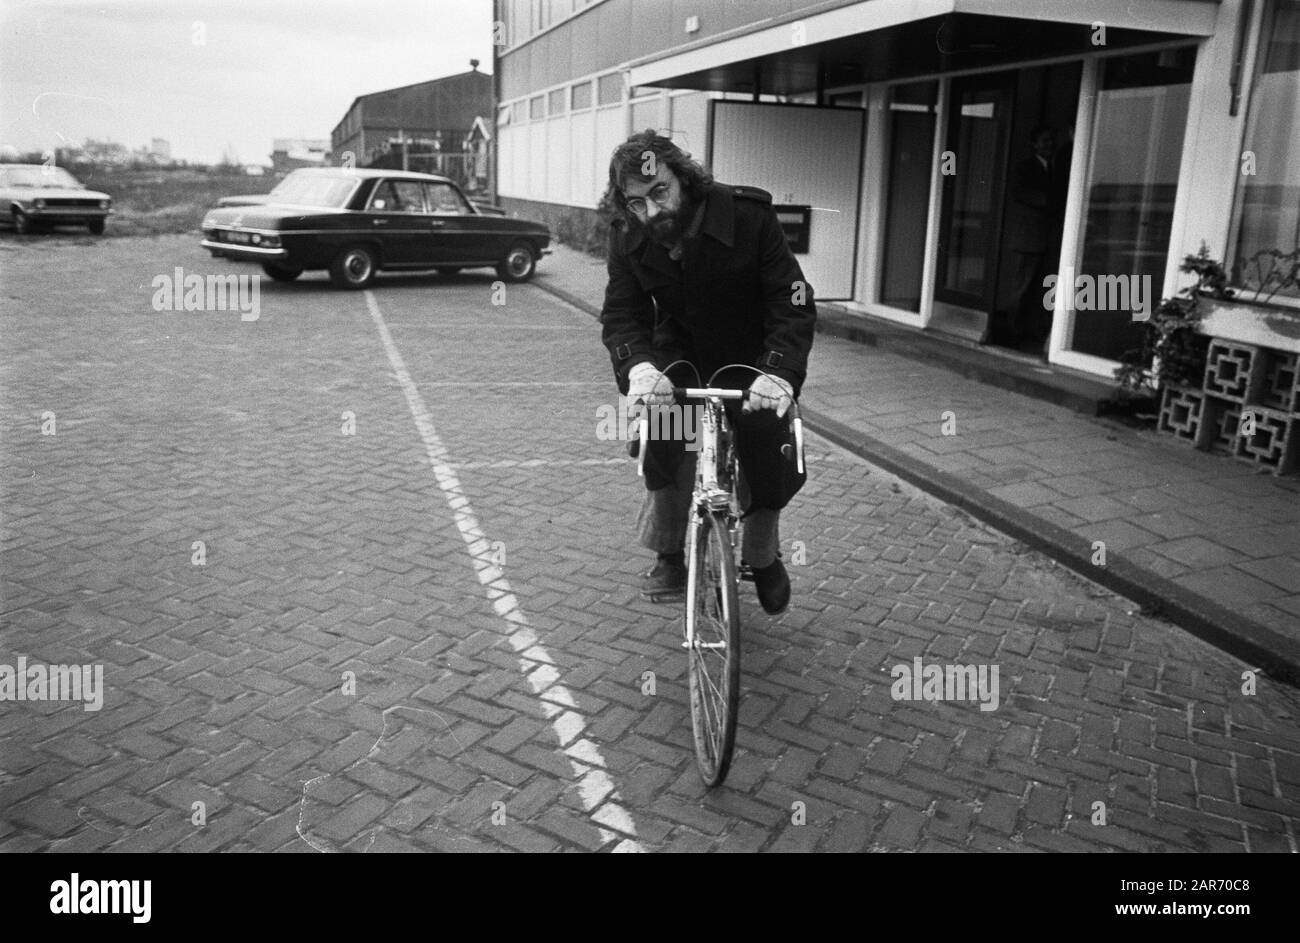 Alderman Roel van Duijn strikes first pole for installa for the processing of end-of-life vehicles at Hollandias Autowrecks BV in Amsterdam, December 18, 1974; Stock Photo